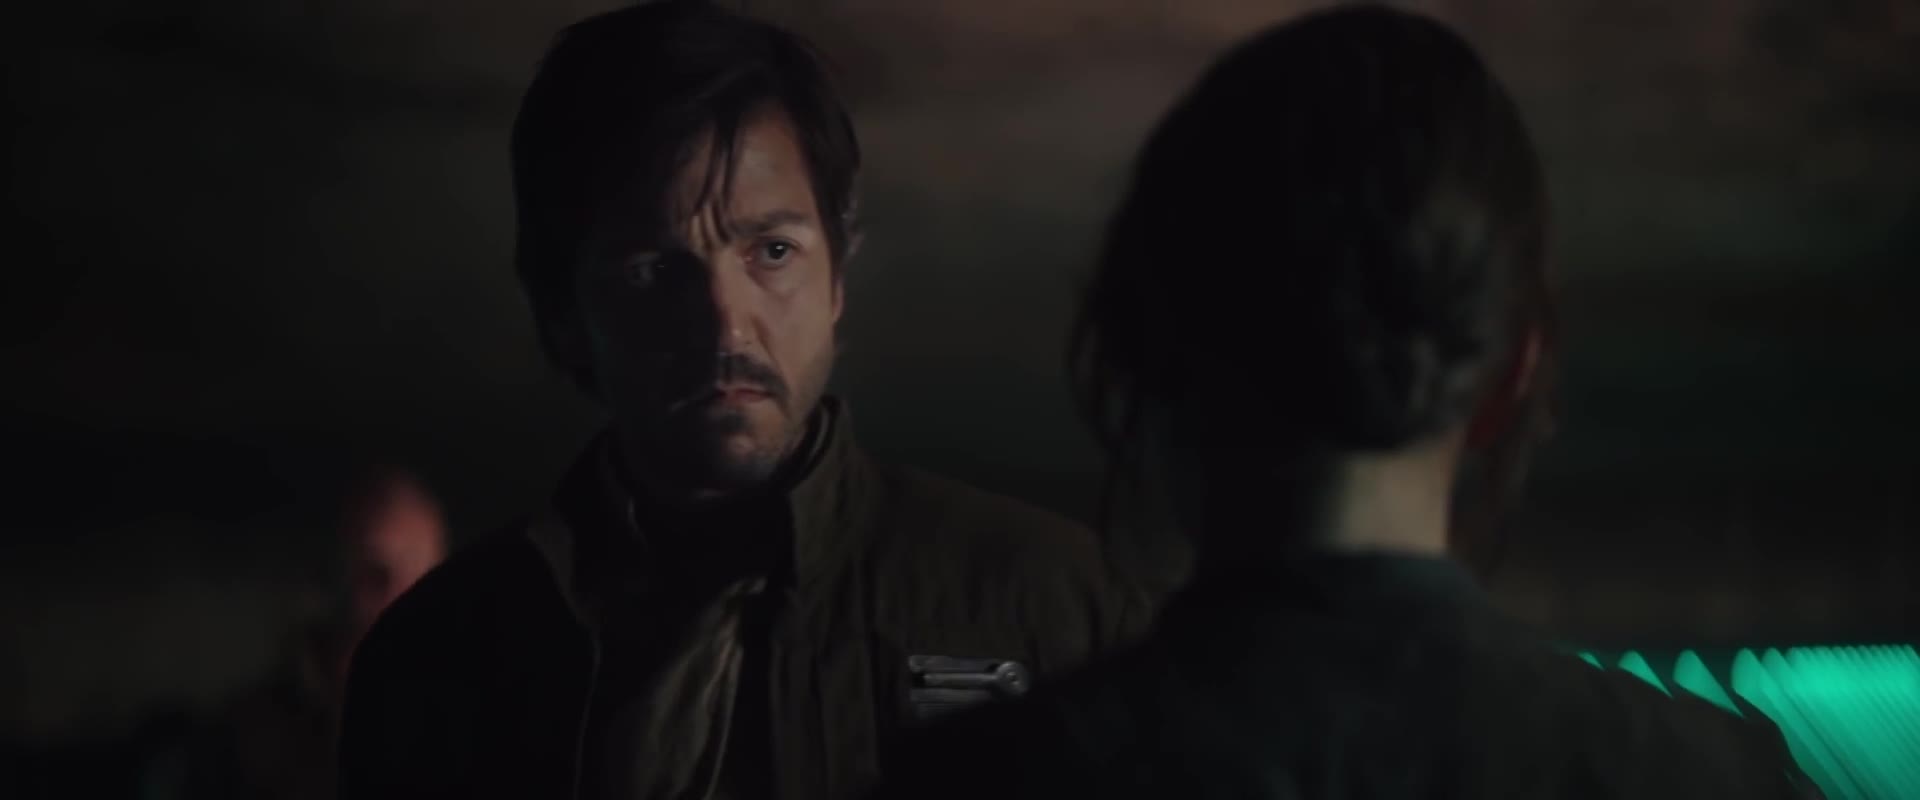 Rogue One: Star Wars Story: Trailer 2